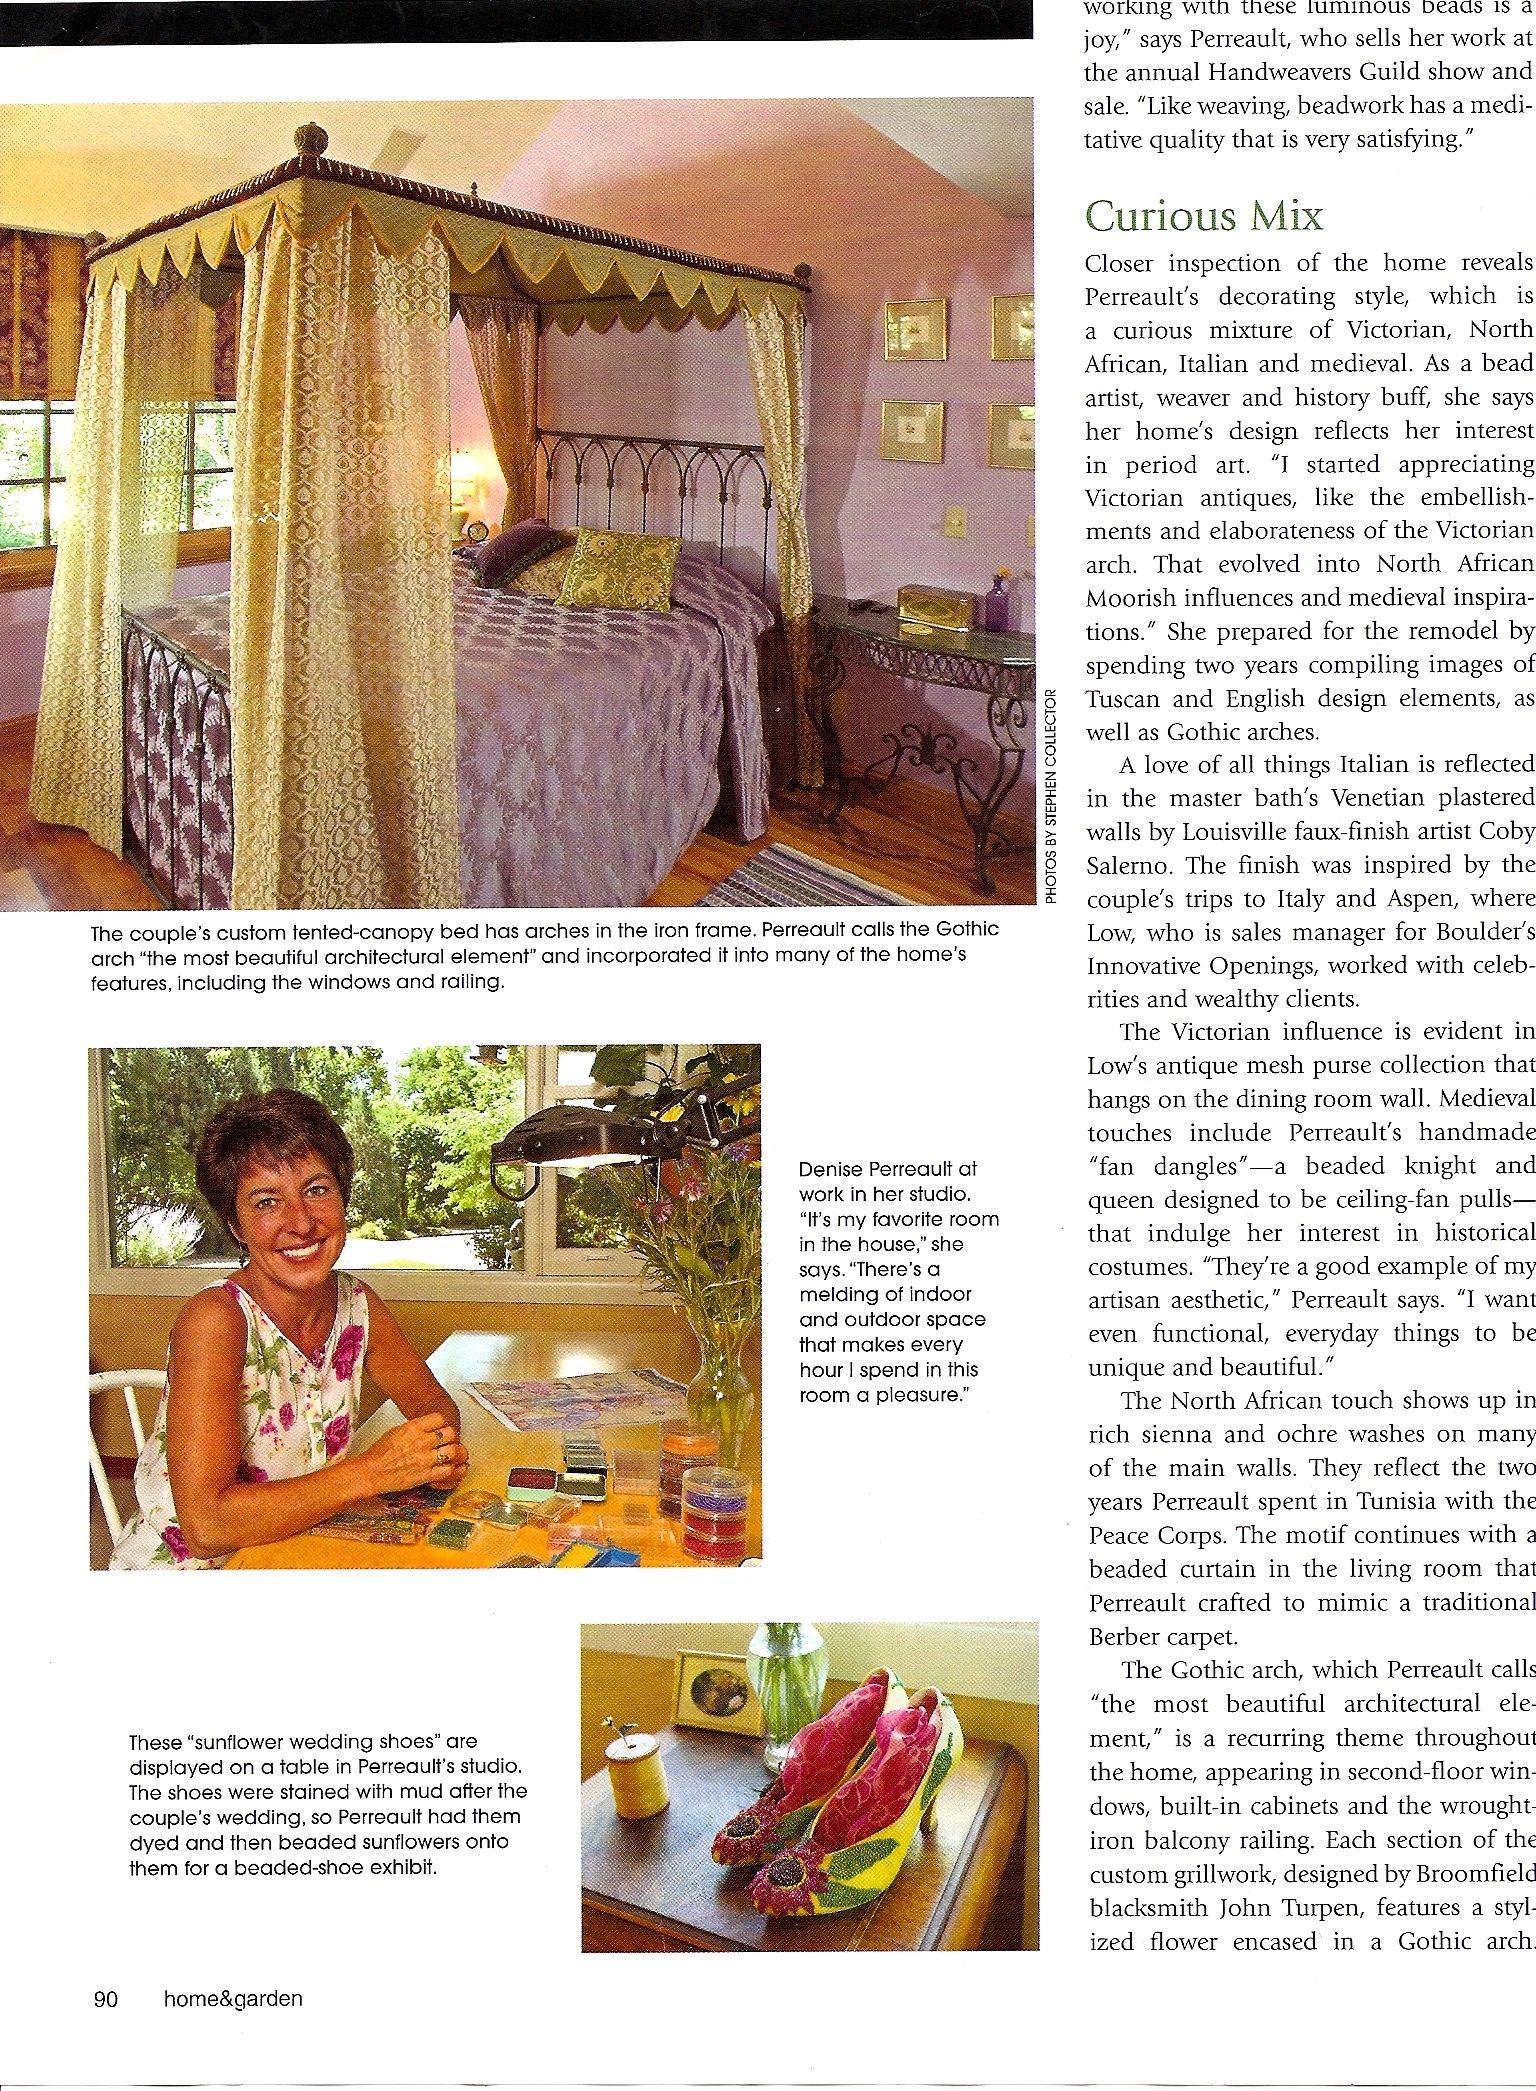 Boulder County Home & Garden, magazine article, page 3 of 4.